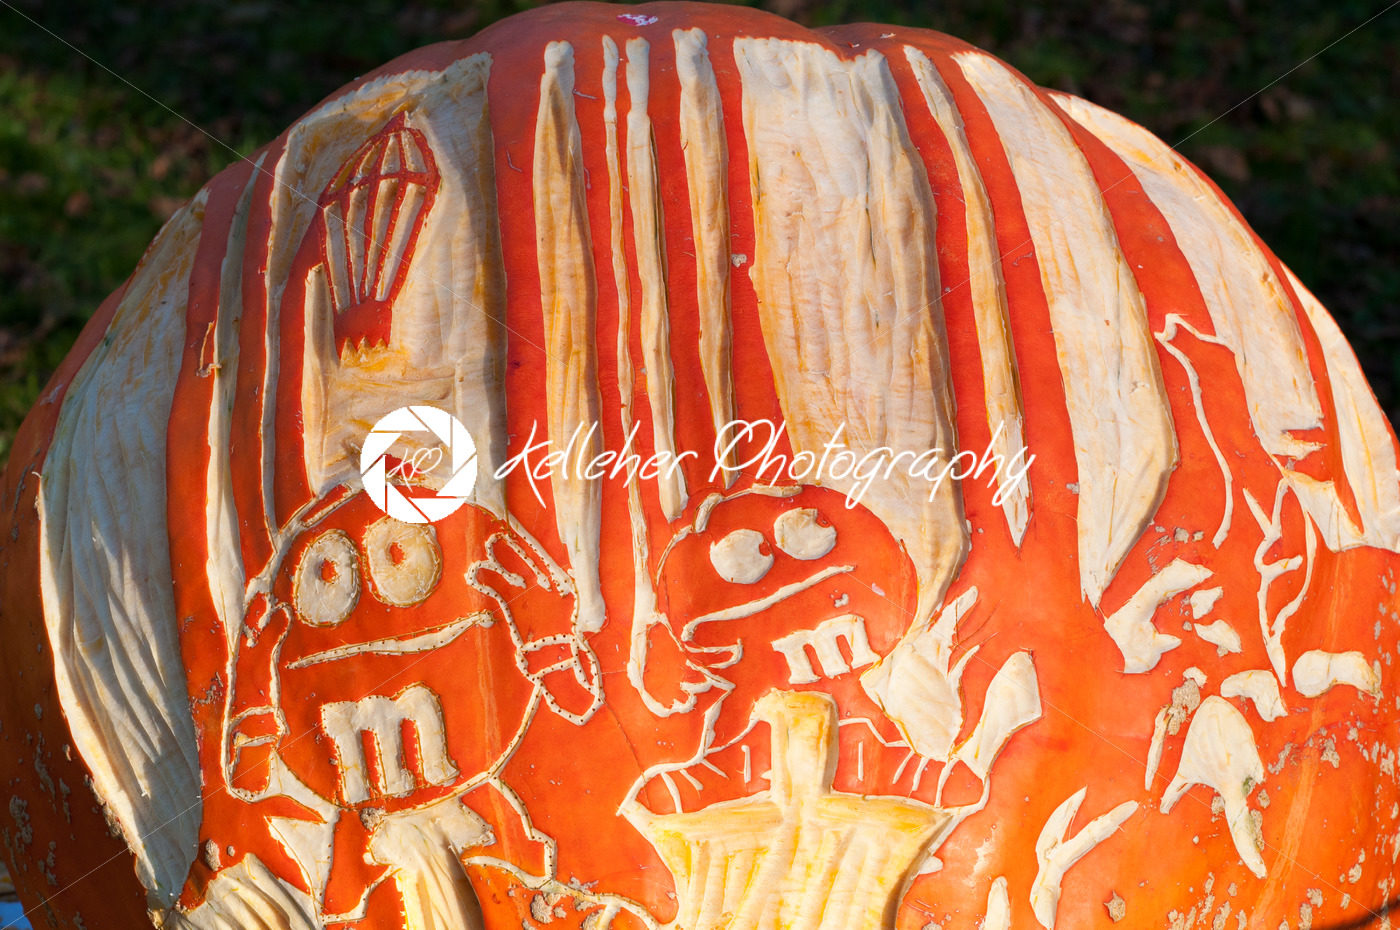 CHADDS FORD, PA – OCTOBER 26: M and M Candy Pumpkin at The Great Pumpkin Carve carving contest on October 26, 2013 - Kelleher Photography Store